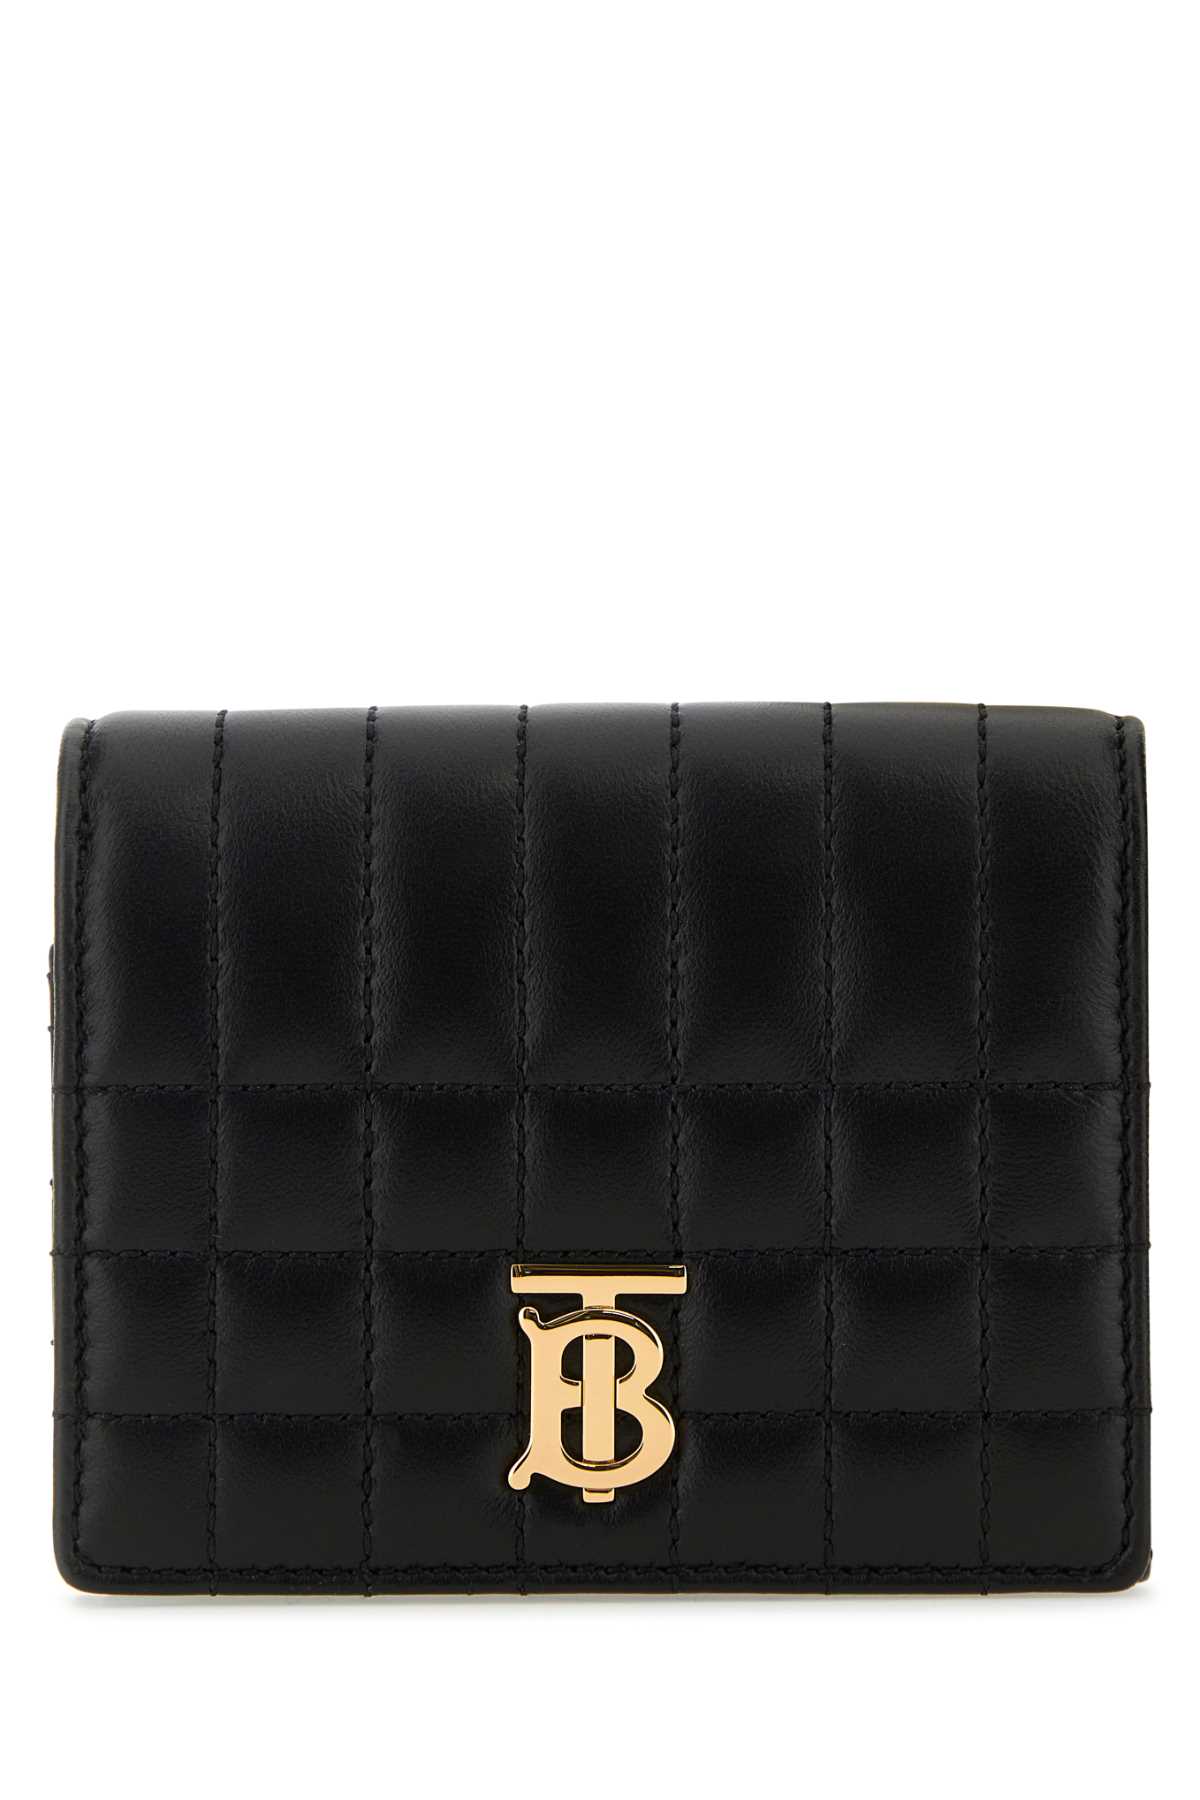 Shop Burberry Black Nappa Leather Wallet In A7527